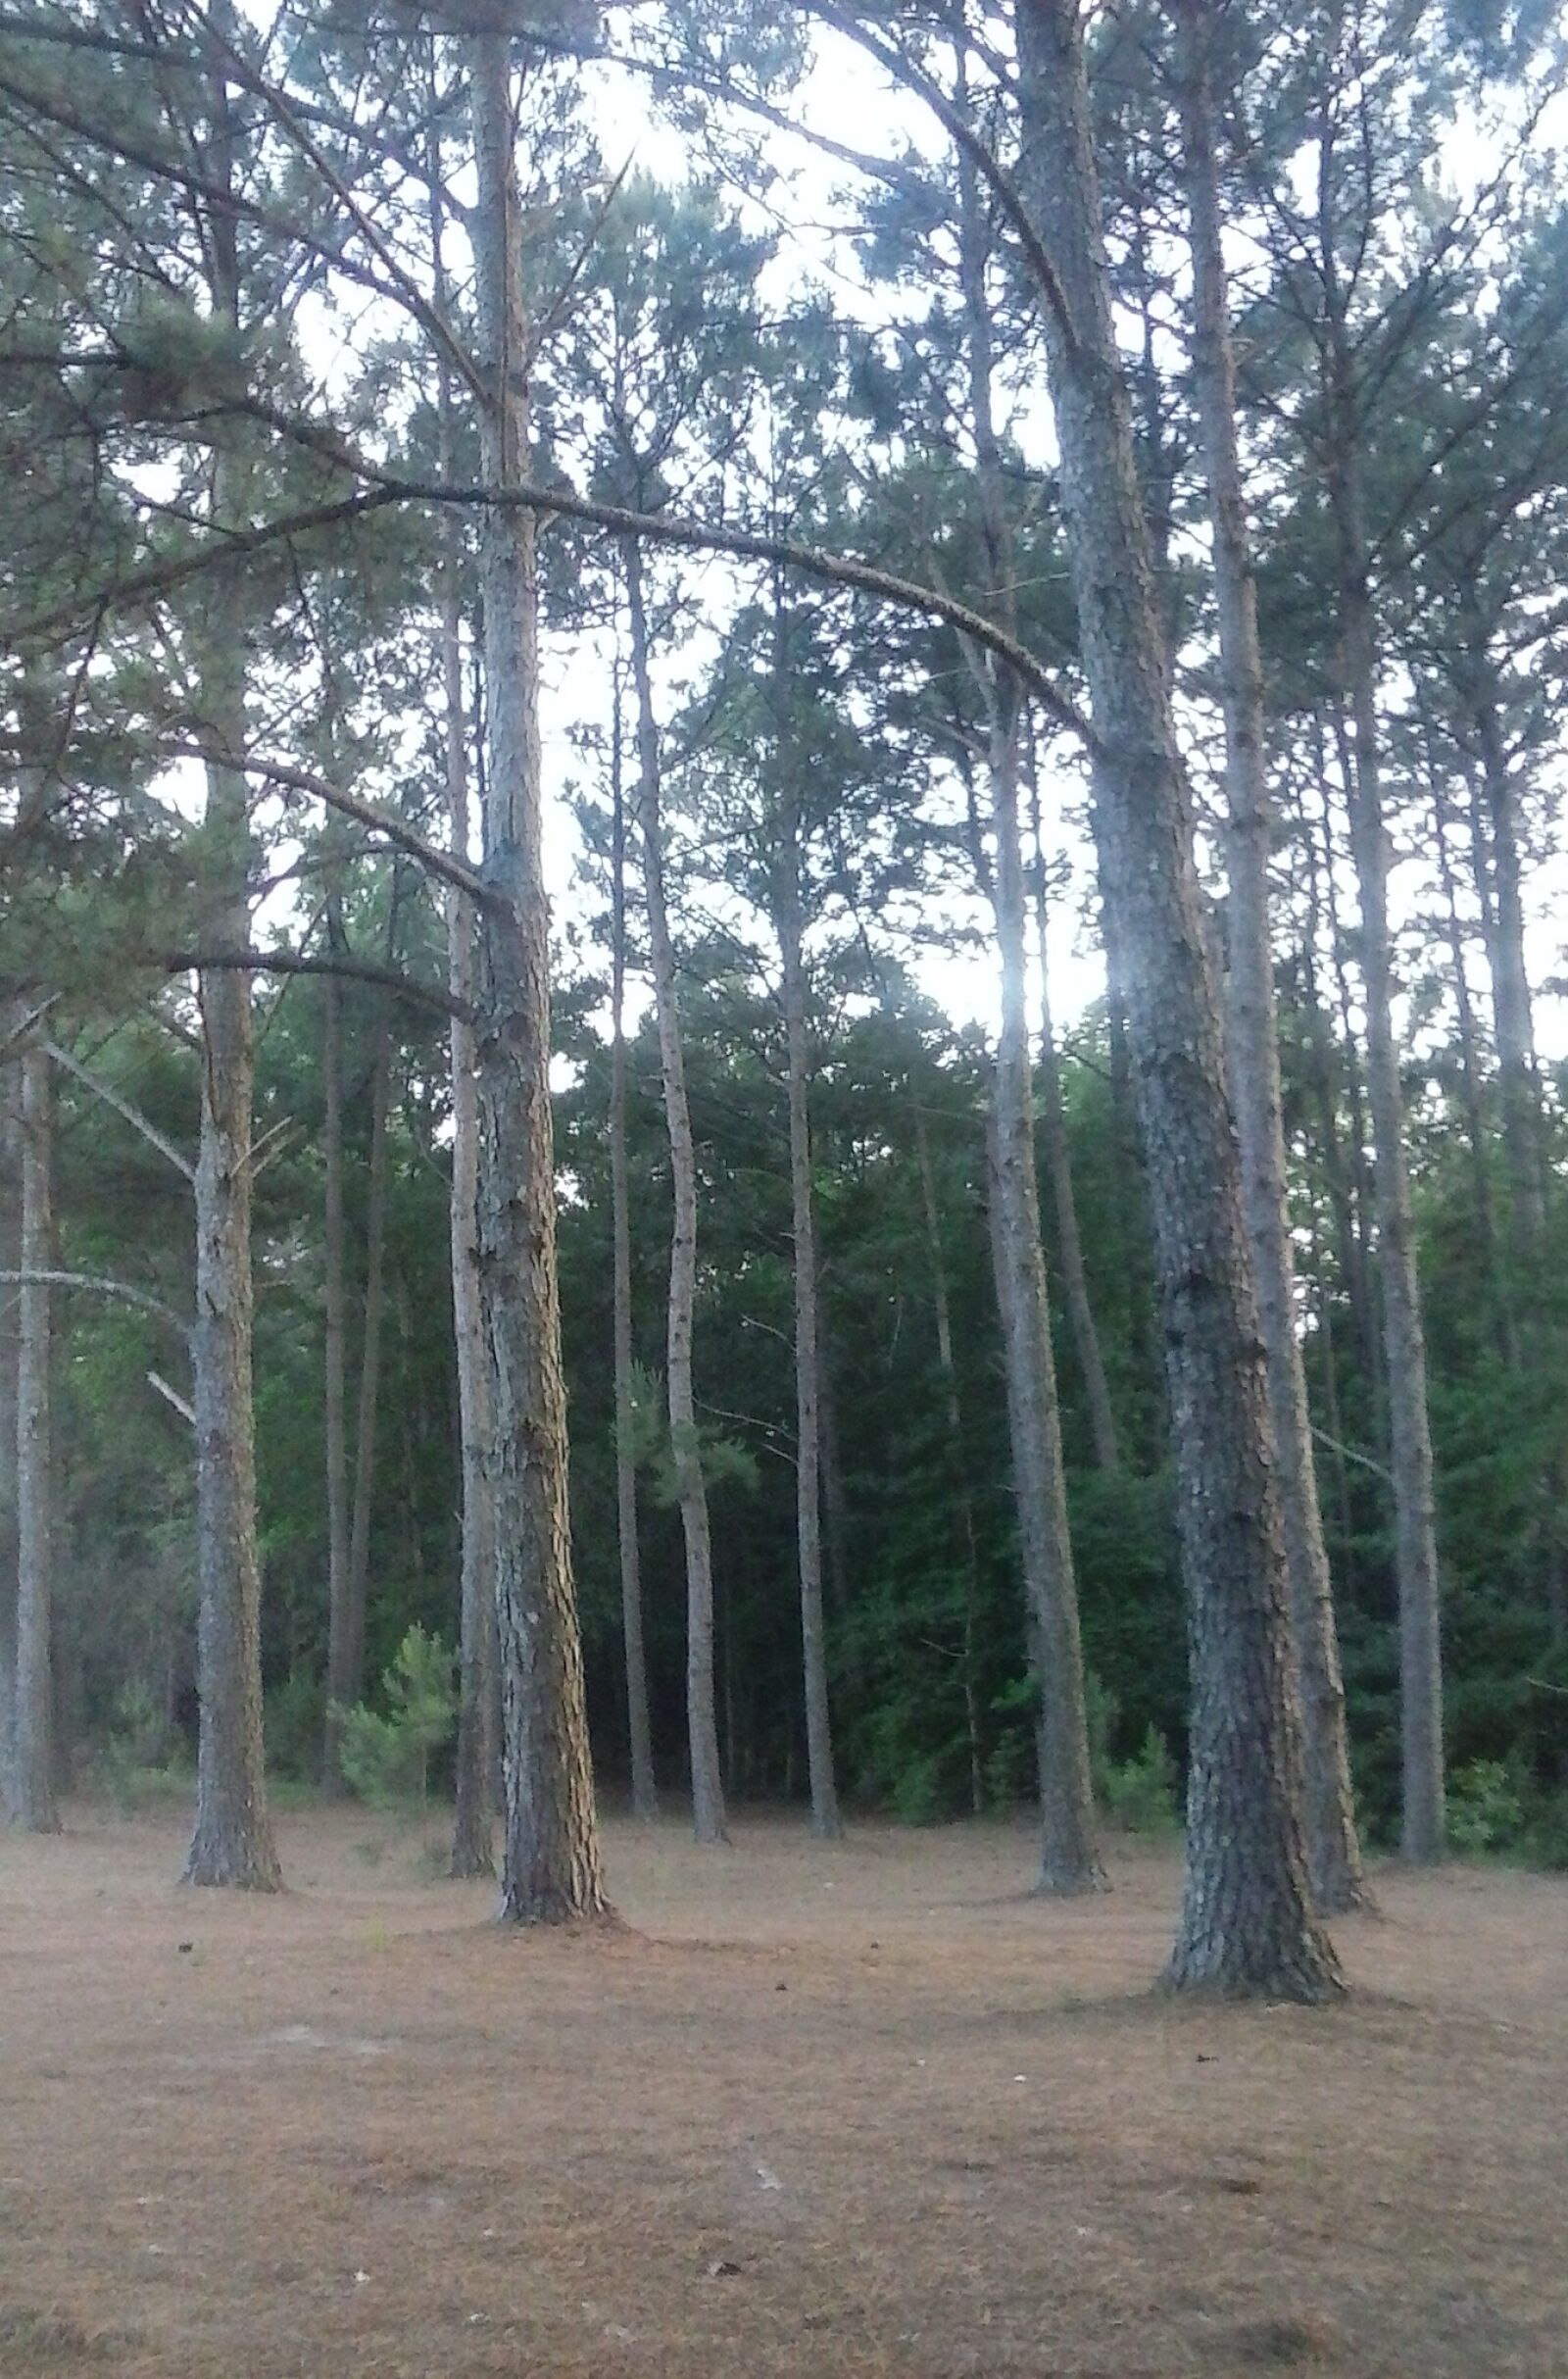 LG Optimus Fuel sample photo. Country, dark, eerie, forest photography